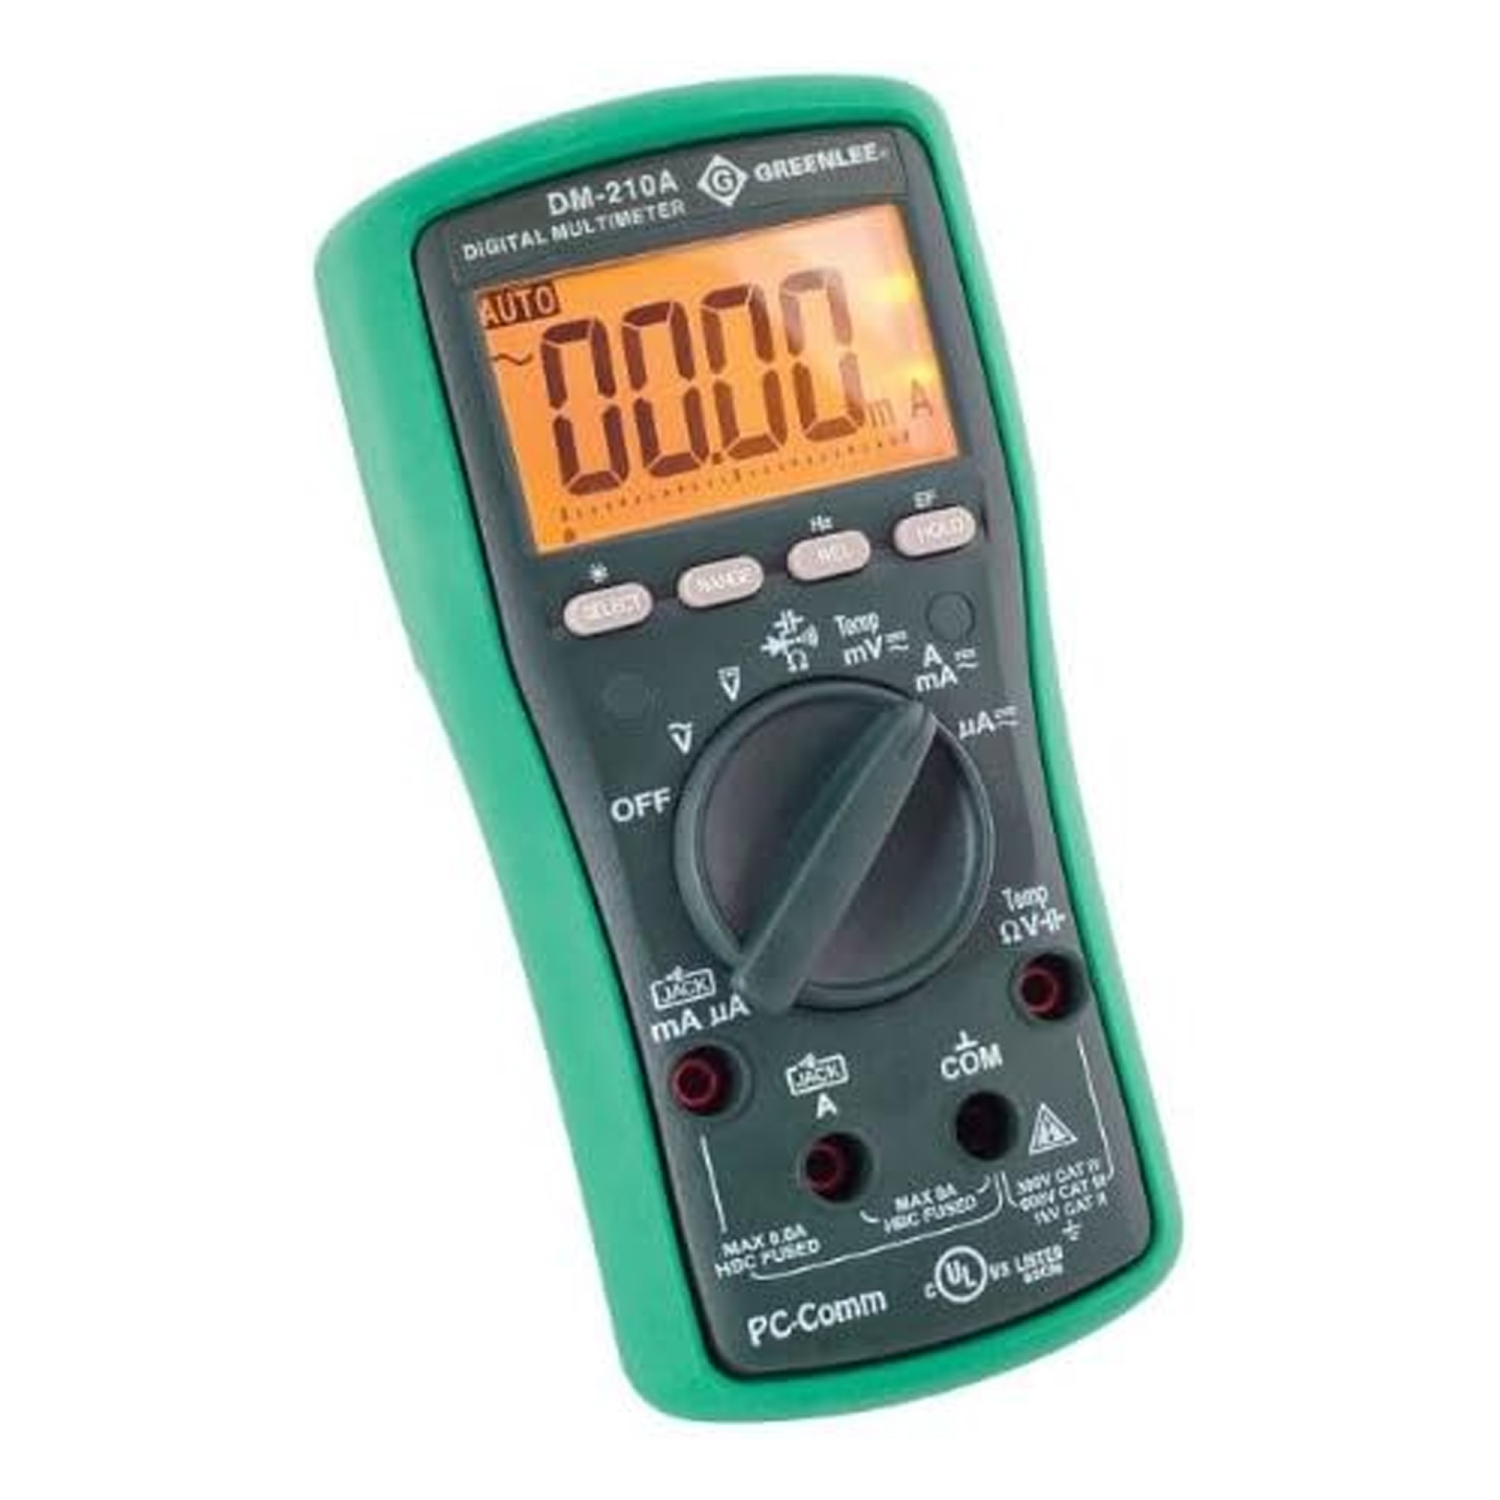 Greenlee DM-210A Digital Multimeter with Auto and Manual Ranging Operation and Non-Contact Voltage Detection